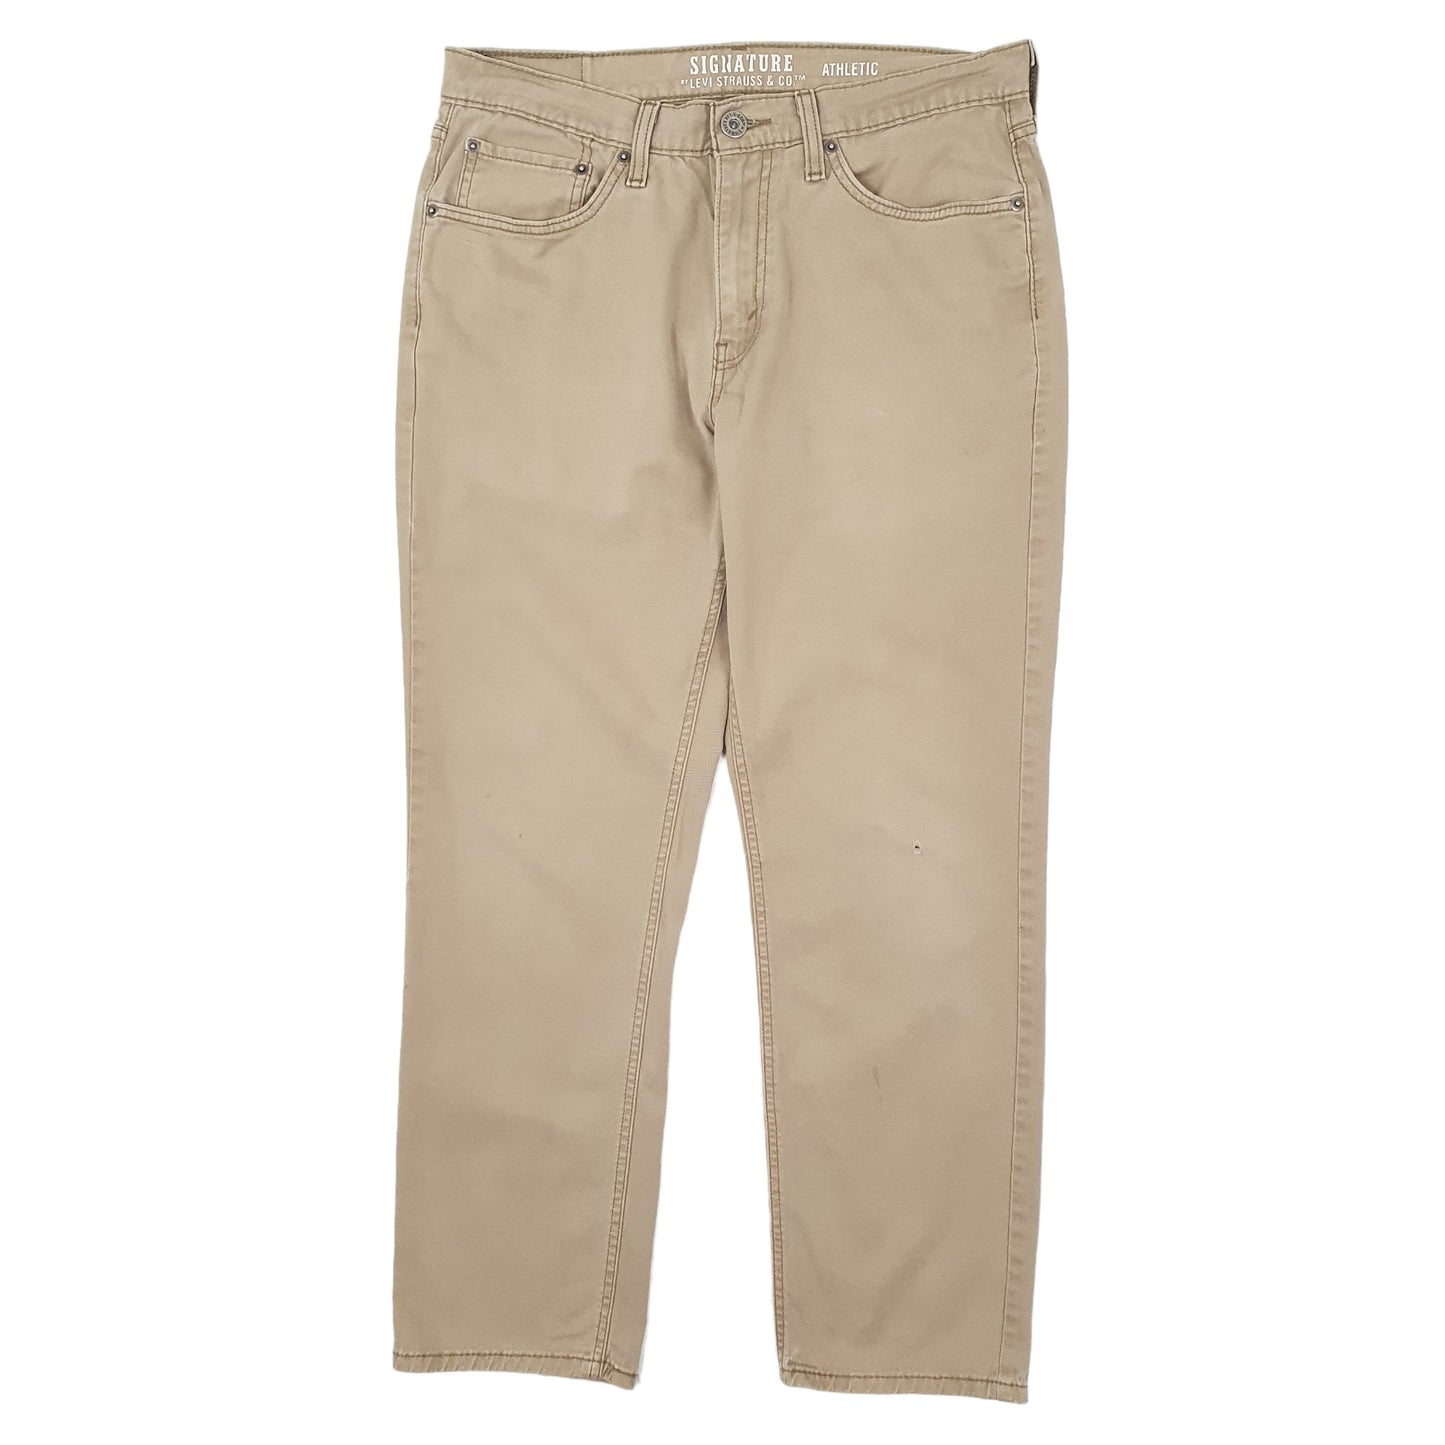 Mens Beige Levis Signature Chino Trousers